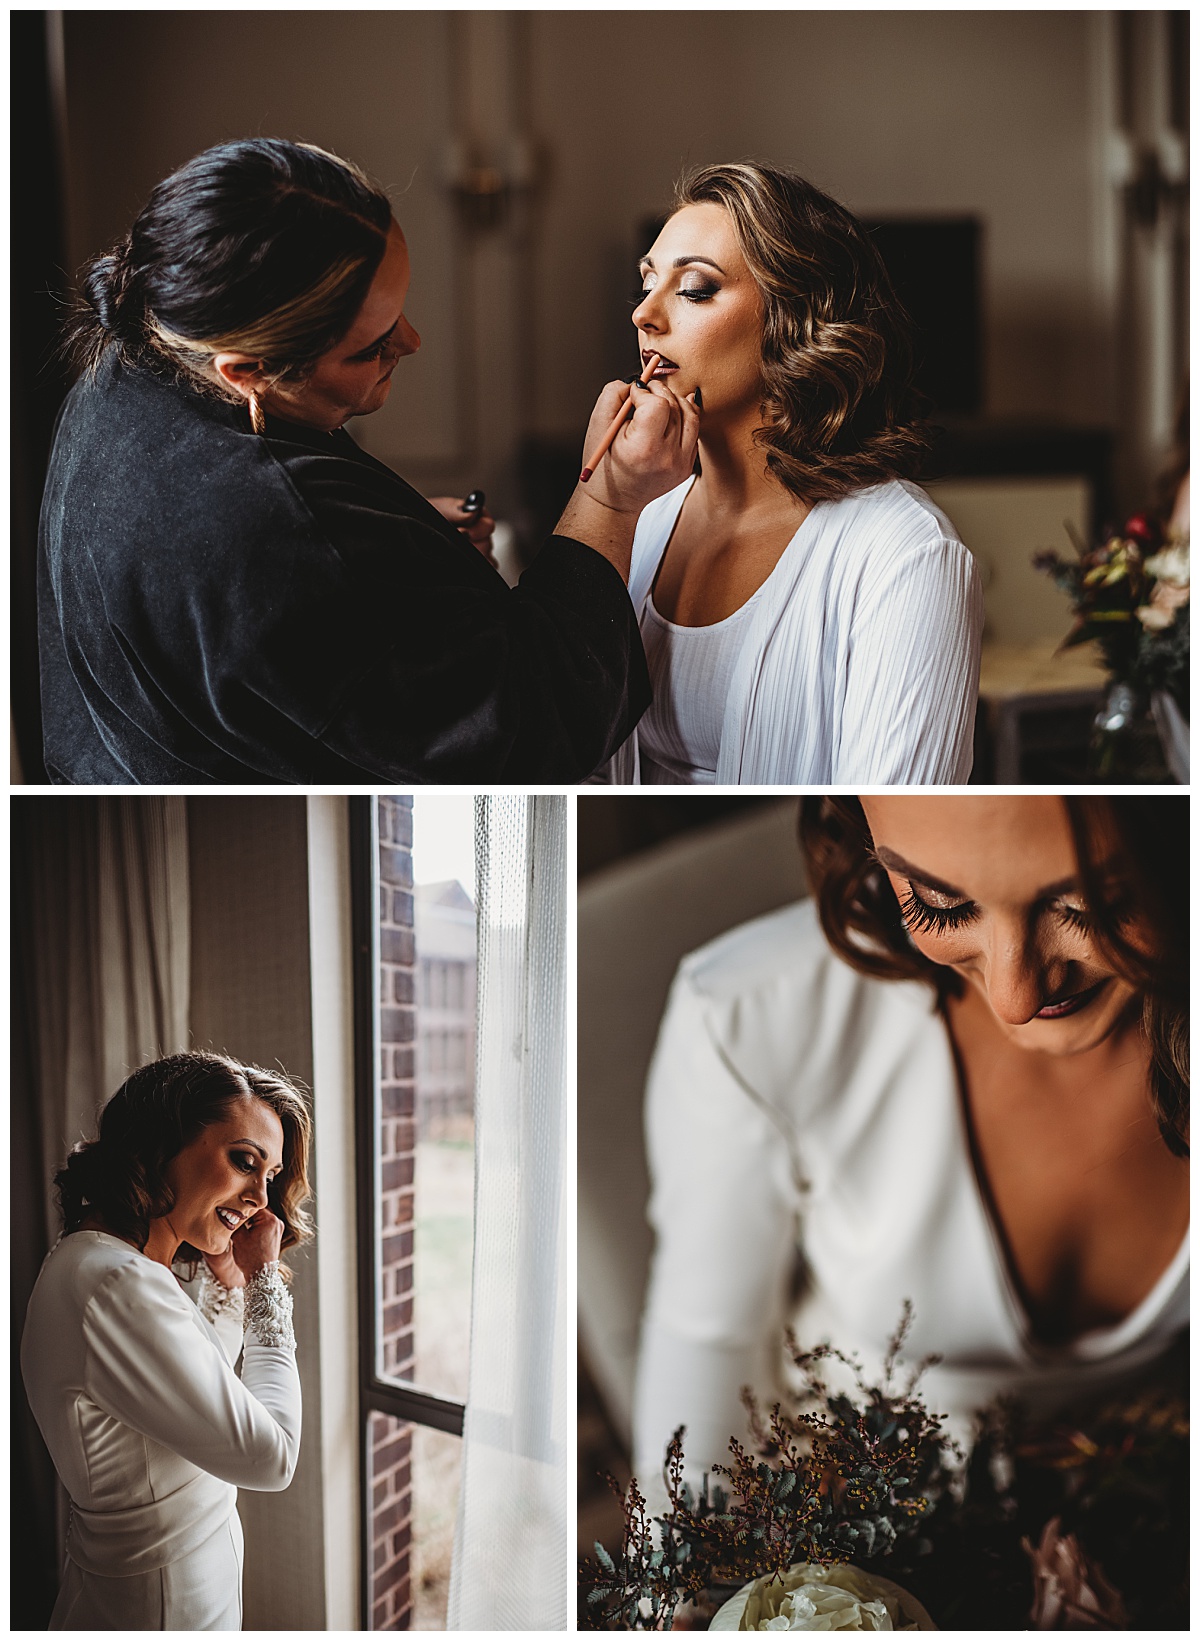 Bride getting ready pictures for a moody winter wedding in Baltimore by Brittany Dunbar Photography, a Baltimore Wedding Photographer.